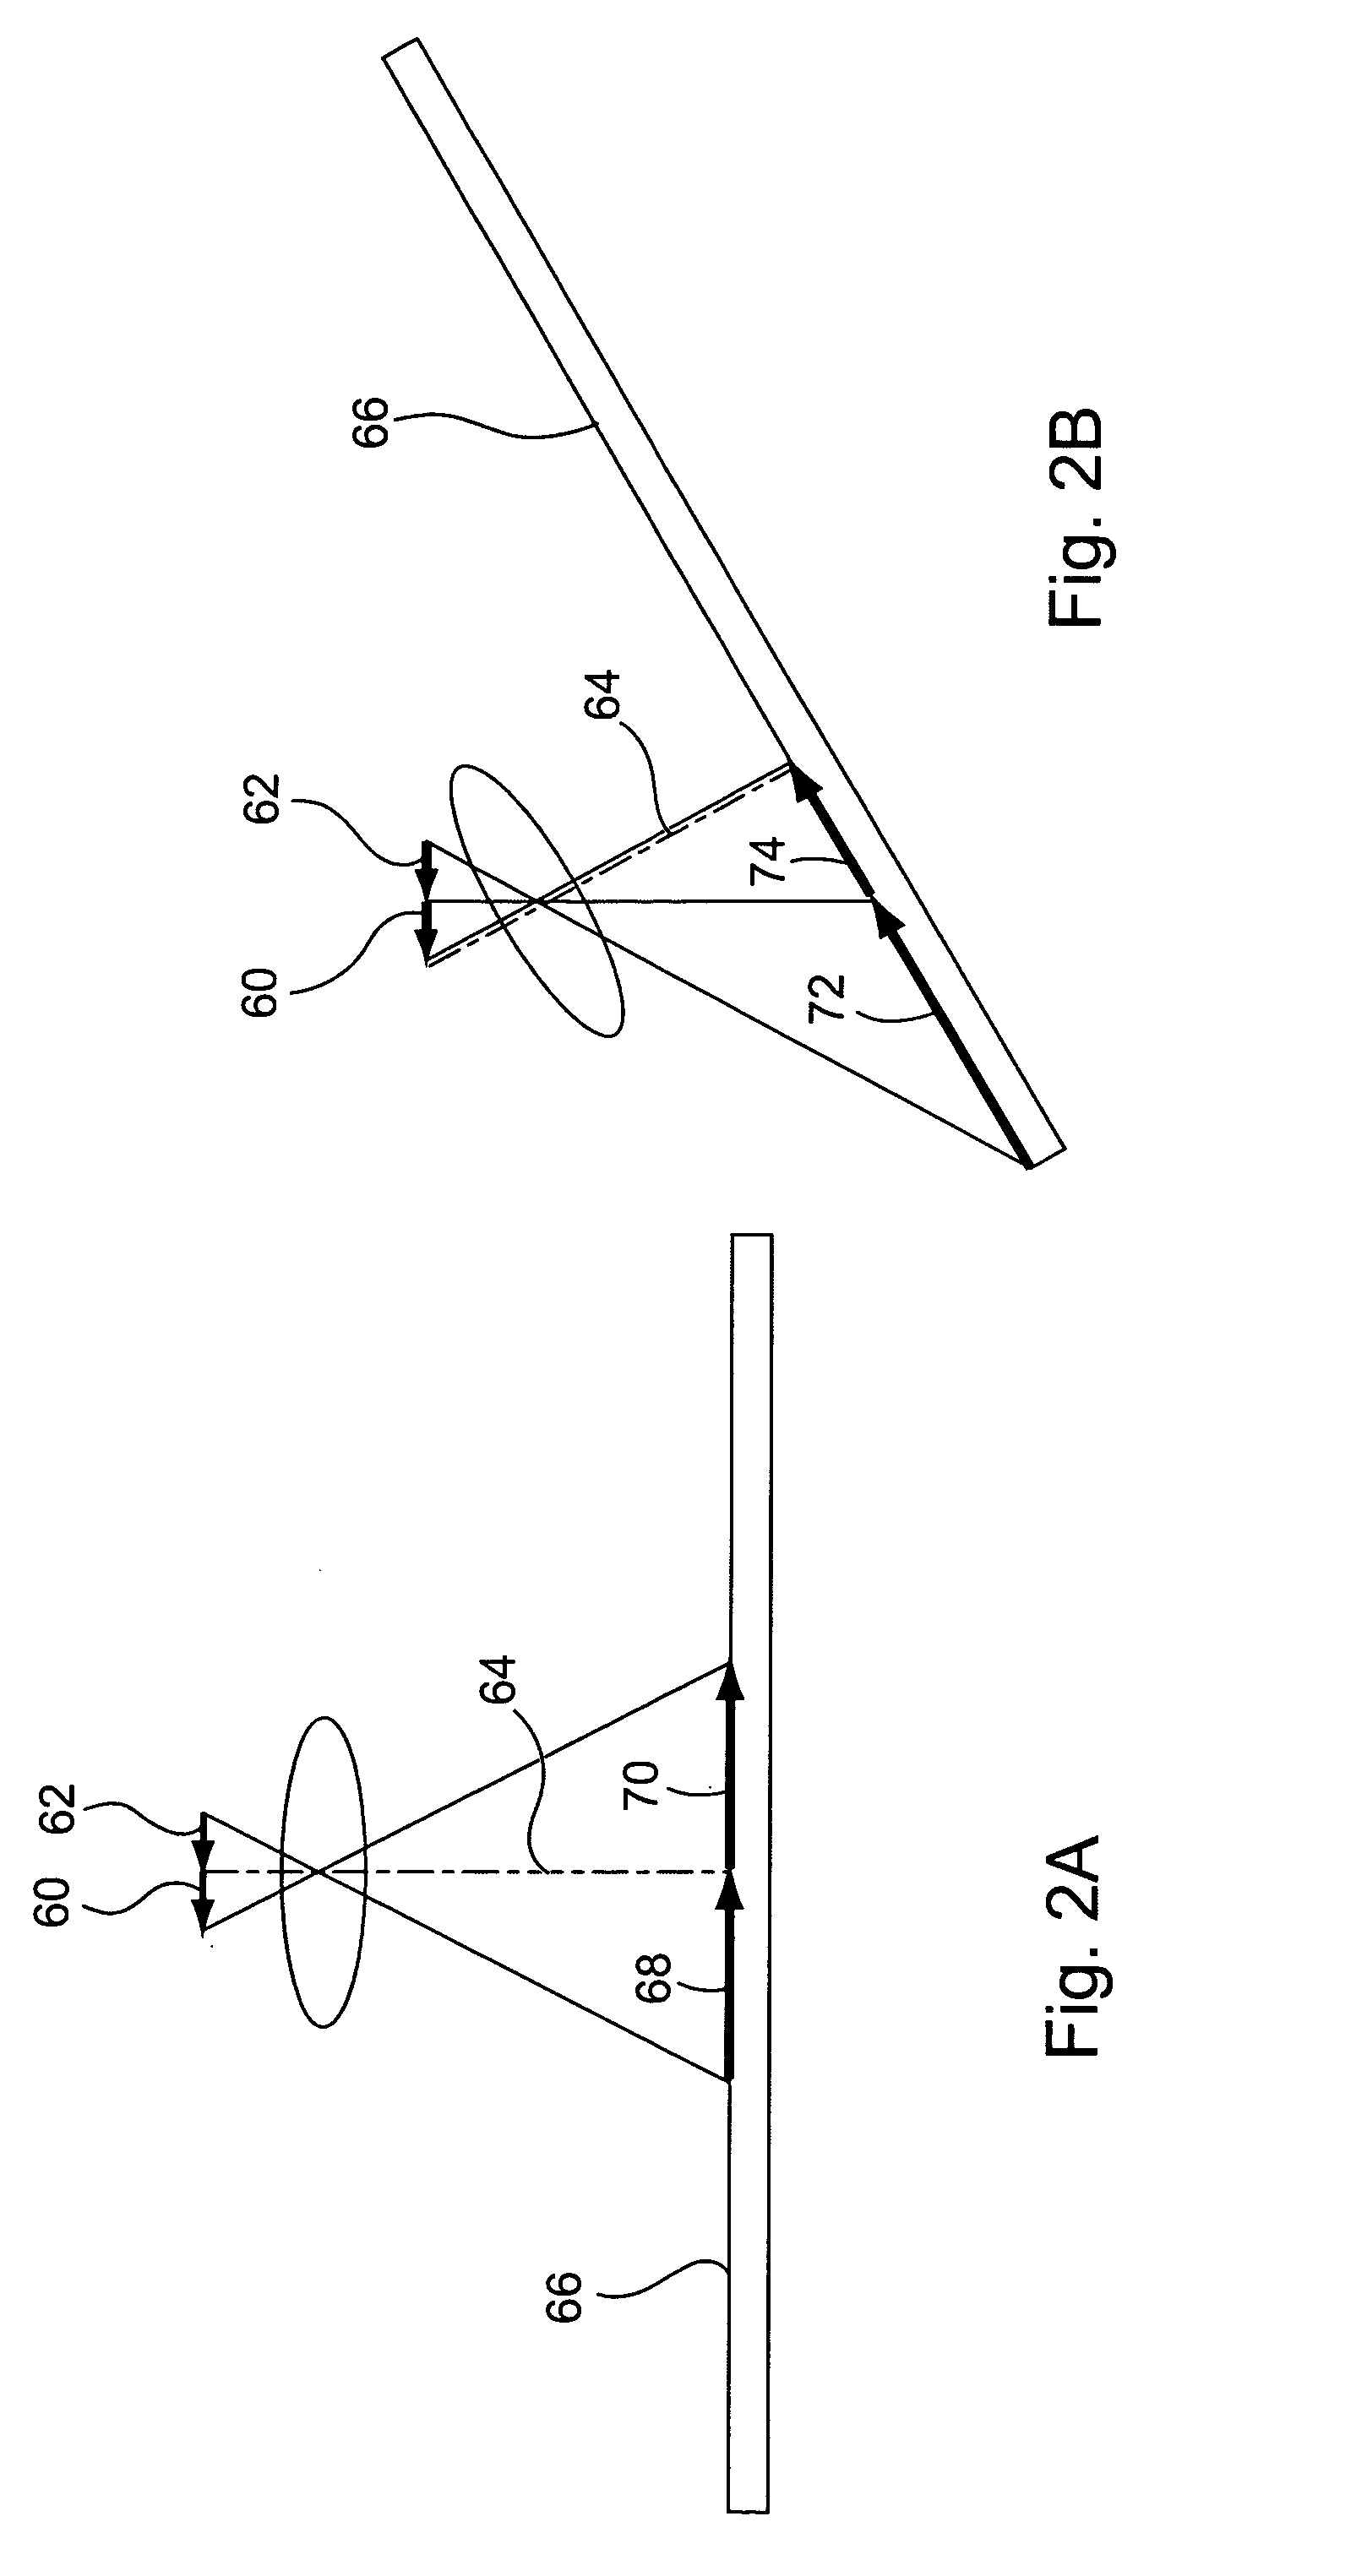 Virtual pan/tilt camera system and method for vehicles